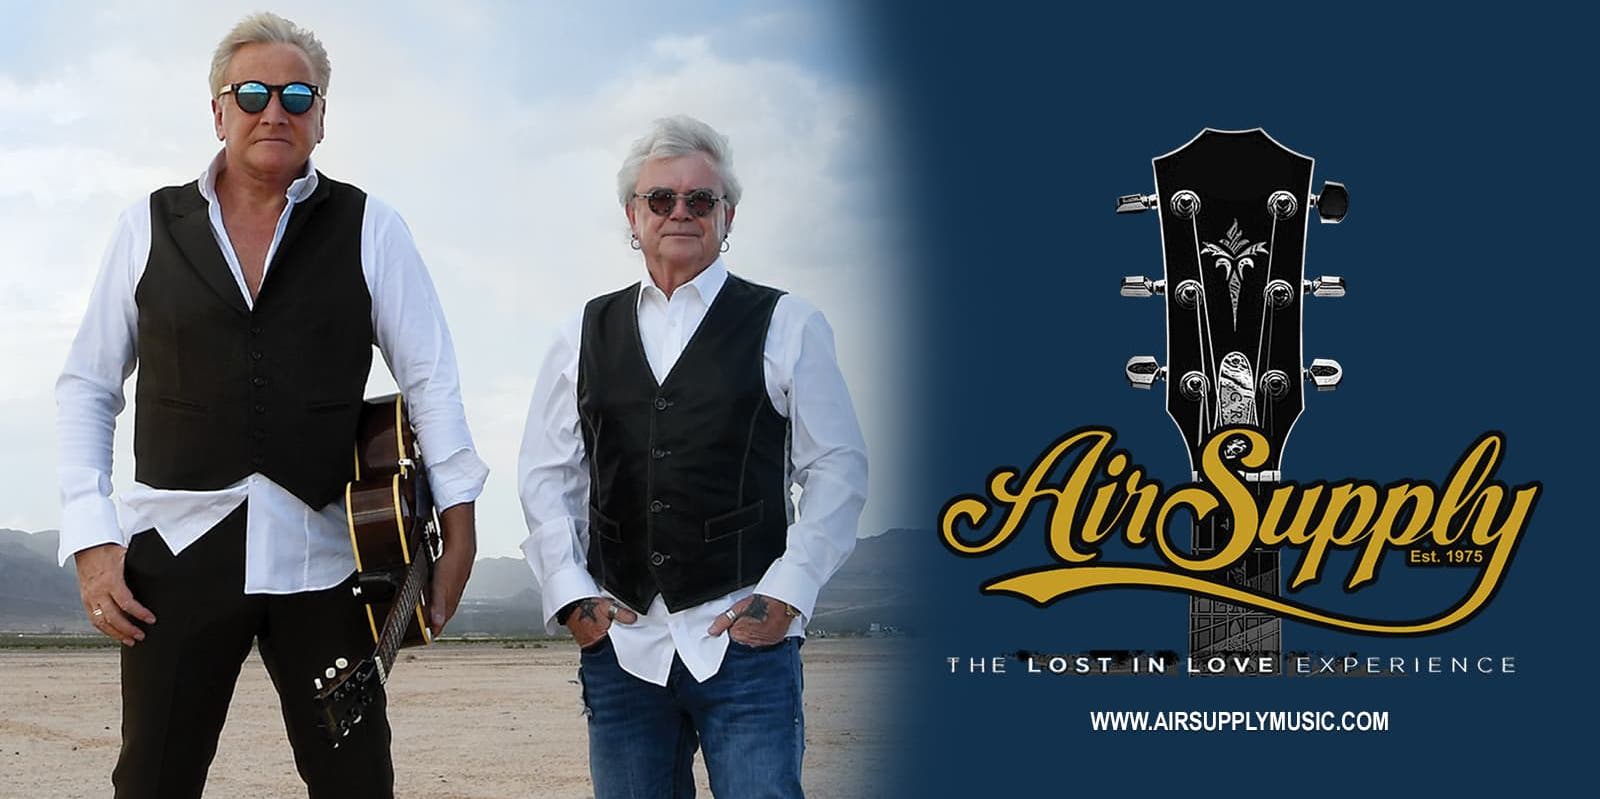 Air Supply | Lost in Love Experience promotional image